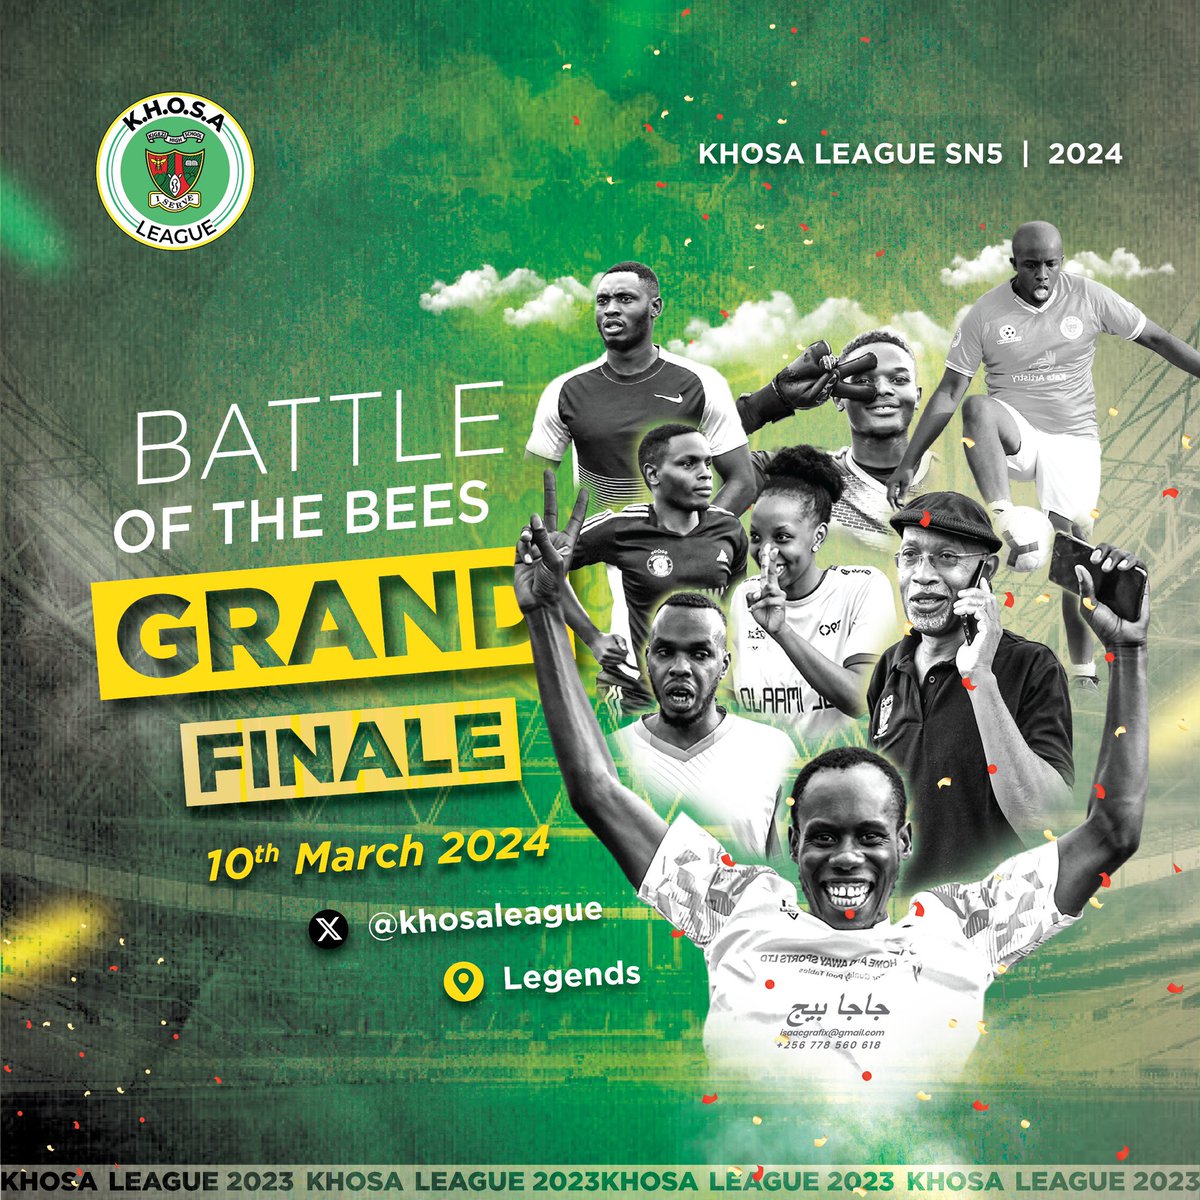 The Final is here! 3 things; 1. Save the date, 2. Rally your cheering squad, 3. Prime those spirits for an epic display as you prepare to be part of the KHOSA League finals at @LegendsKla this 10th of March 2024. #KHOSALeagueFinals